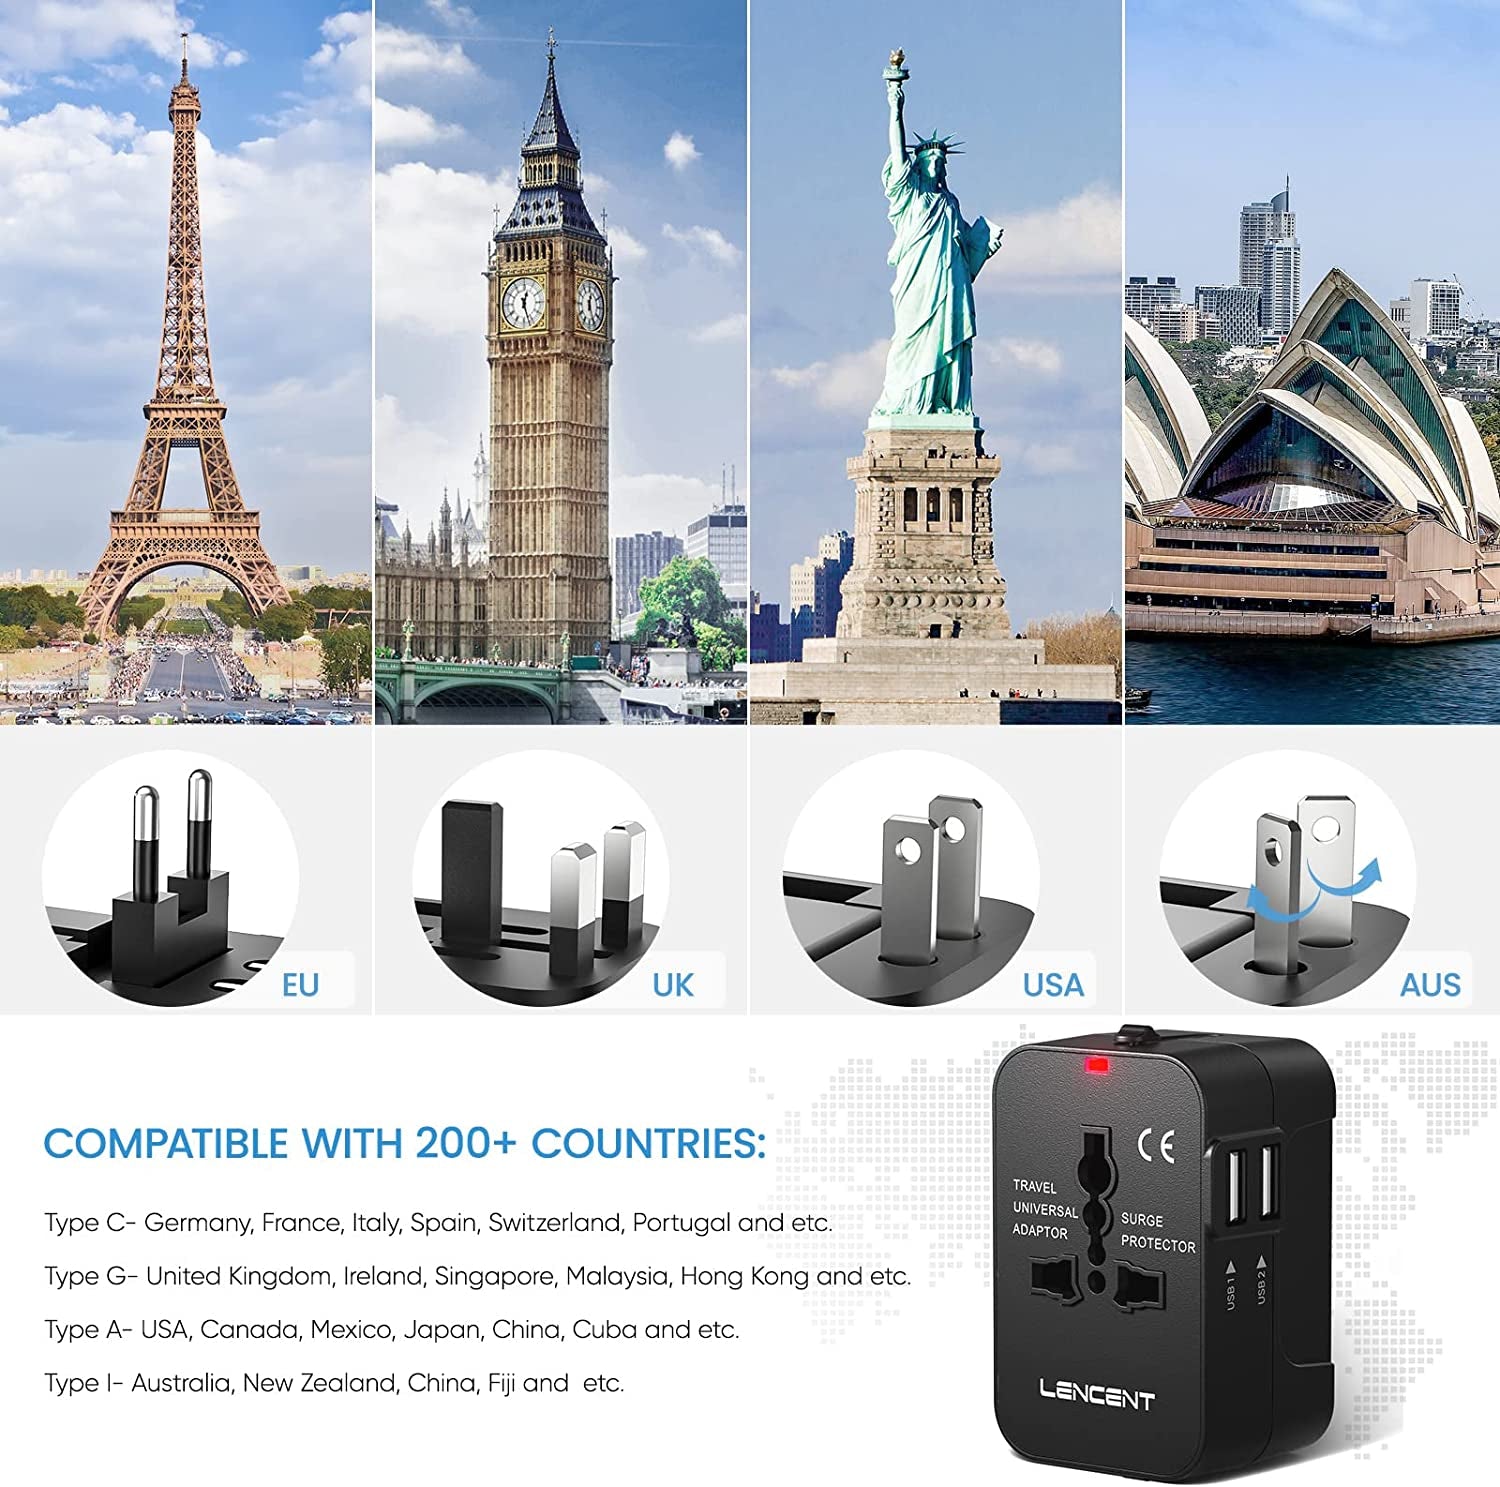 LENCENT, LENCENT Universal Travel Adaptor, All-In-One International Power Adapter, Worldwide Travel Charger for US, UK, EU, AU, over 200 Countries